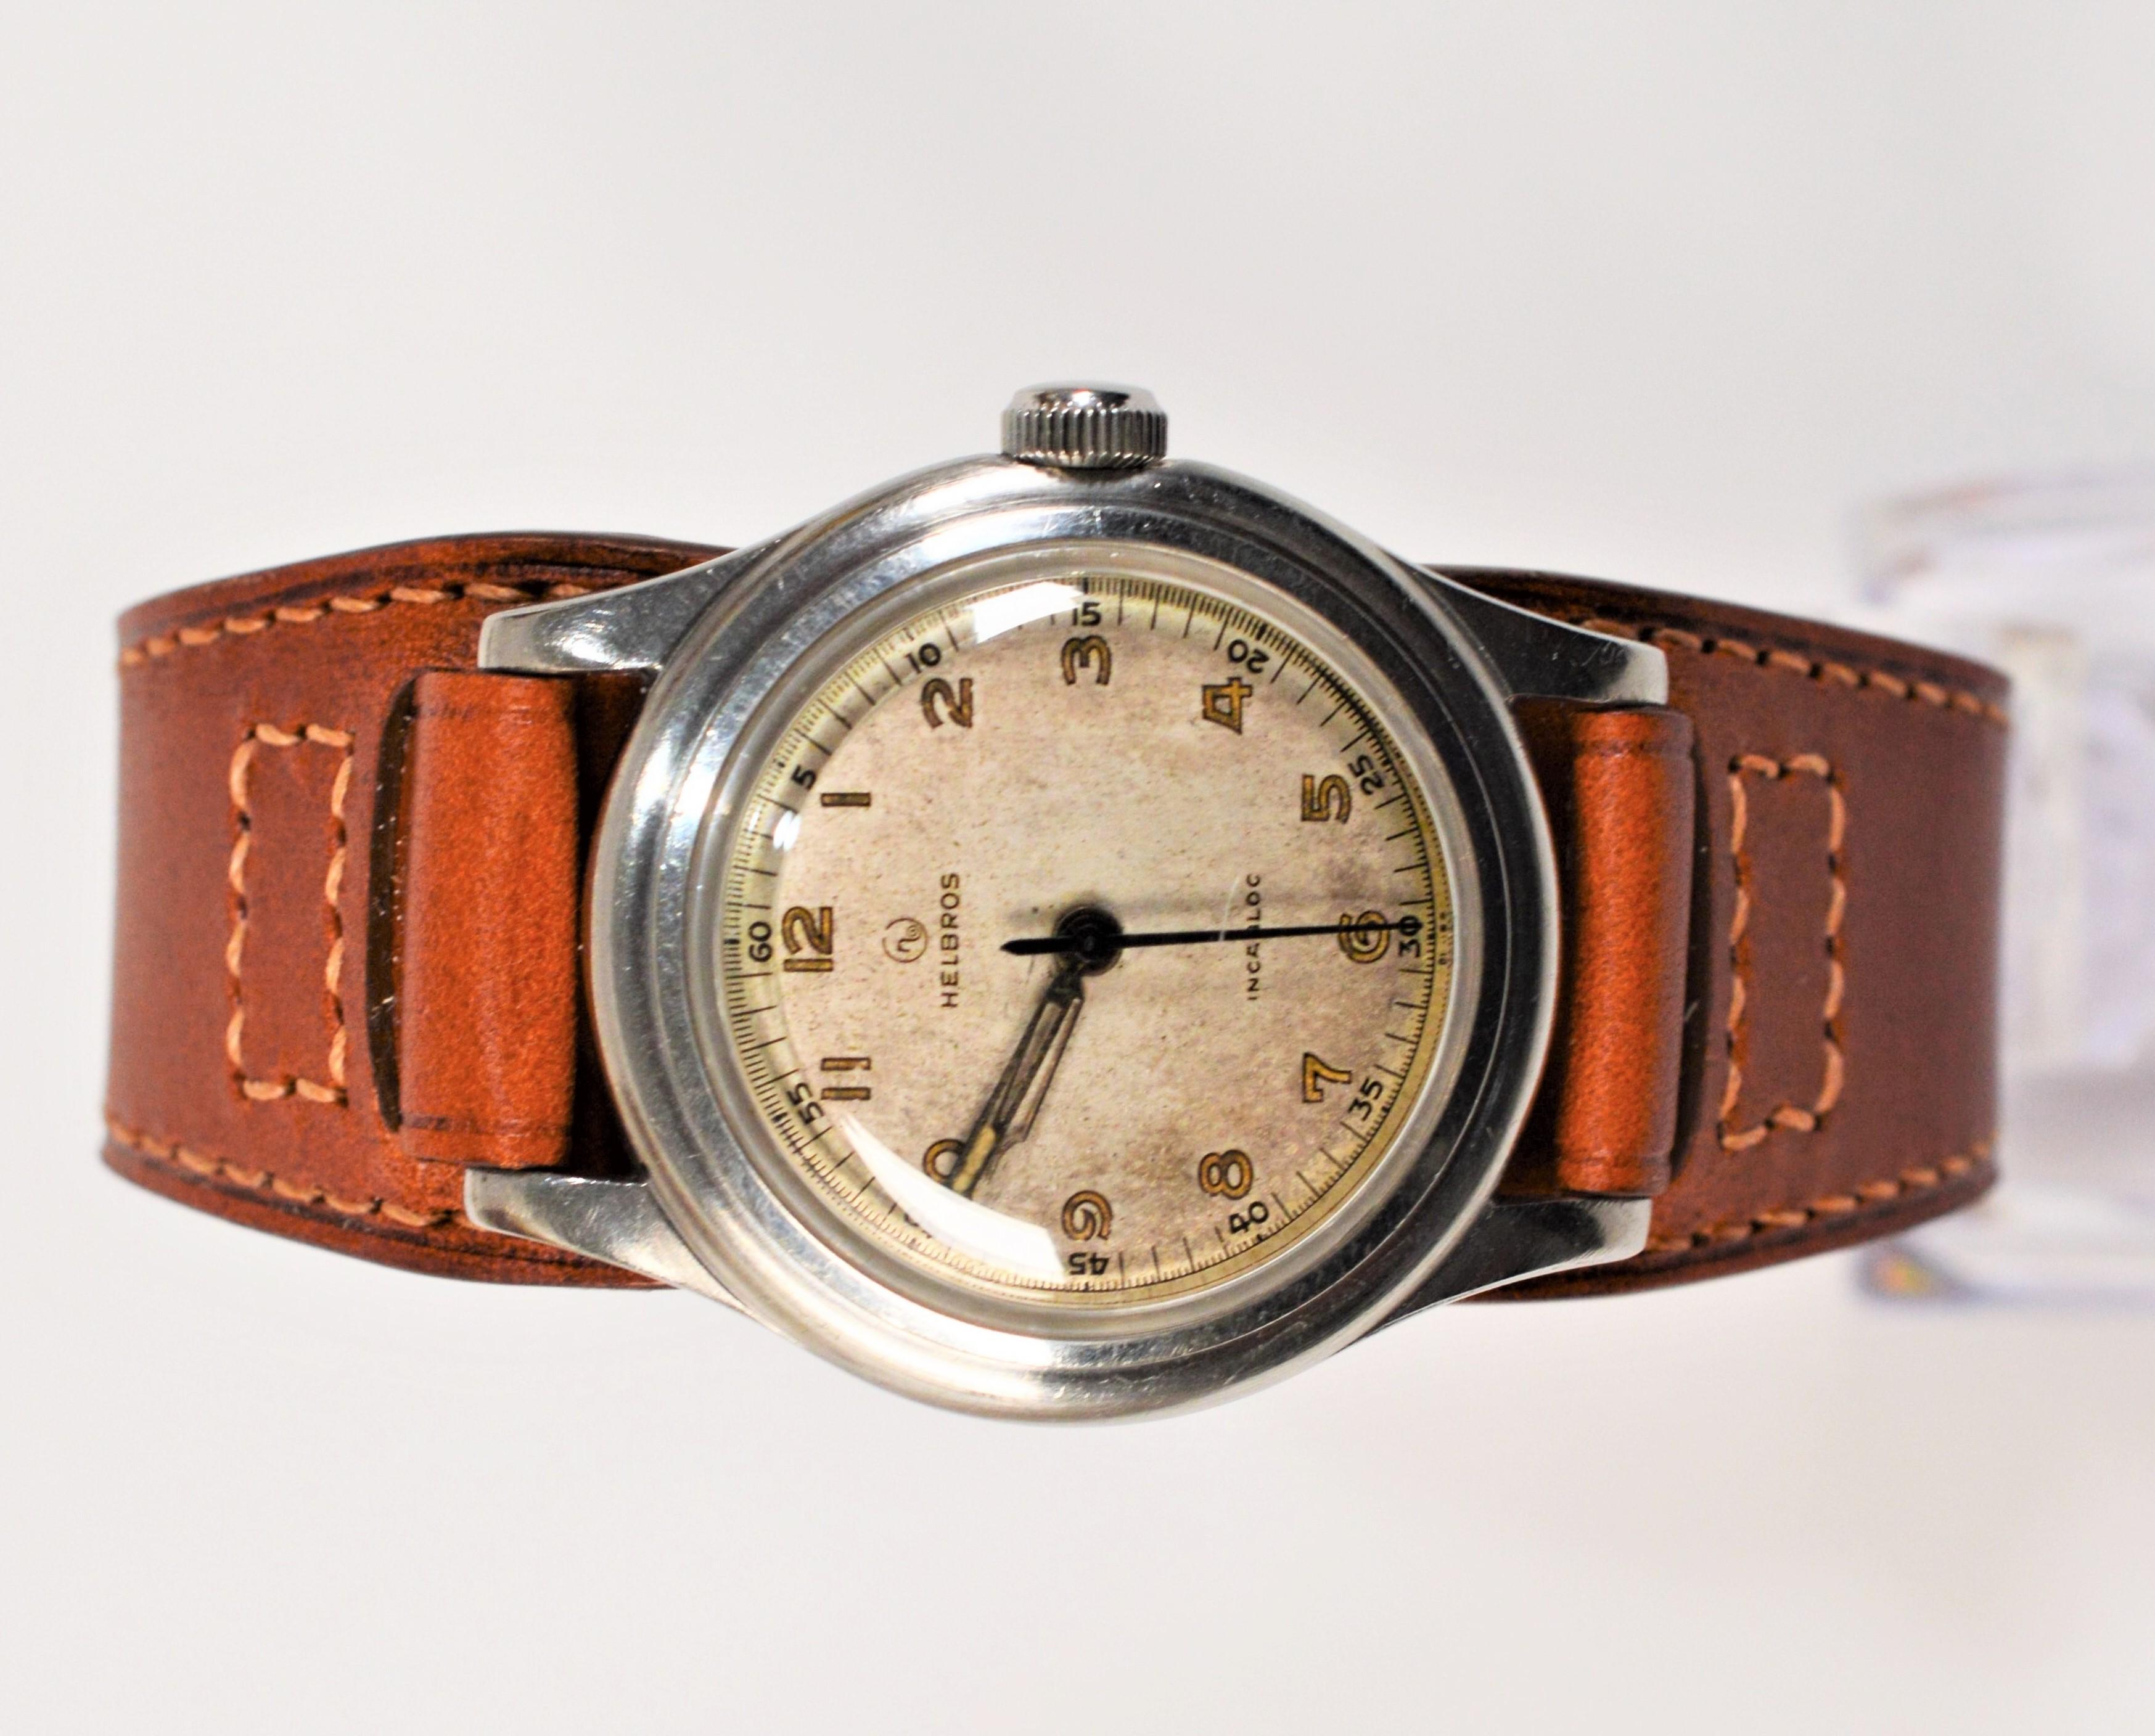 Authentic WWII era, this 33mm steel case Helbros Wrist Watch evokes true vintage feel. Manual wind with a seven jewel movement  this watch is in original condition which presents plenty of character. A new custom leather strap has been specially